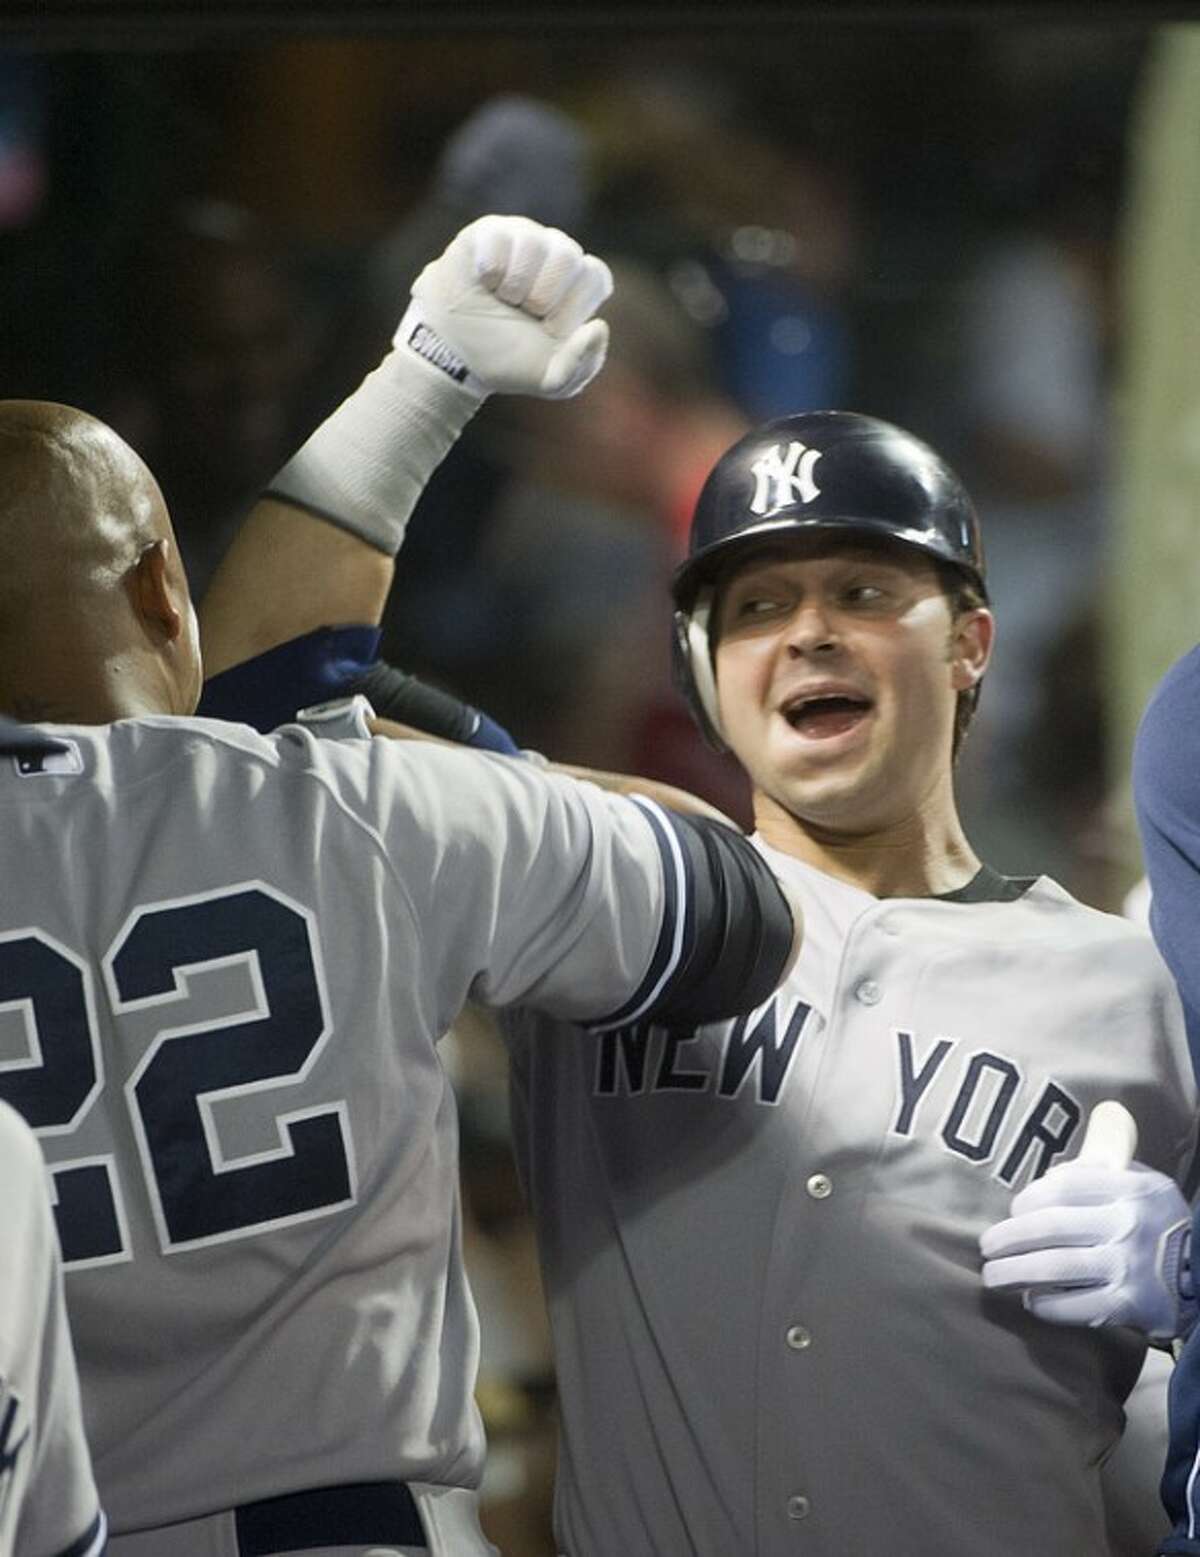 Nick Swisher of the New York Yankees, celebrates his seventh inning two-run home run off Cleveland Indians reliever Tony Sipp, with Andruw Jones (22) during a baseball game in Cleveland, Friday, Aug. 24, 2012. (AP Phil Long)